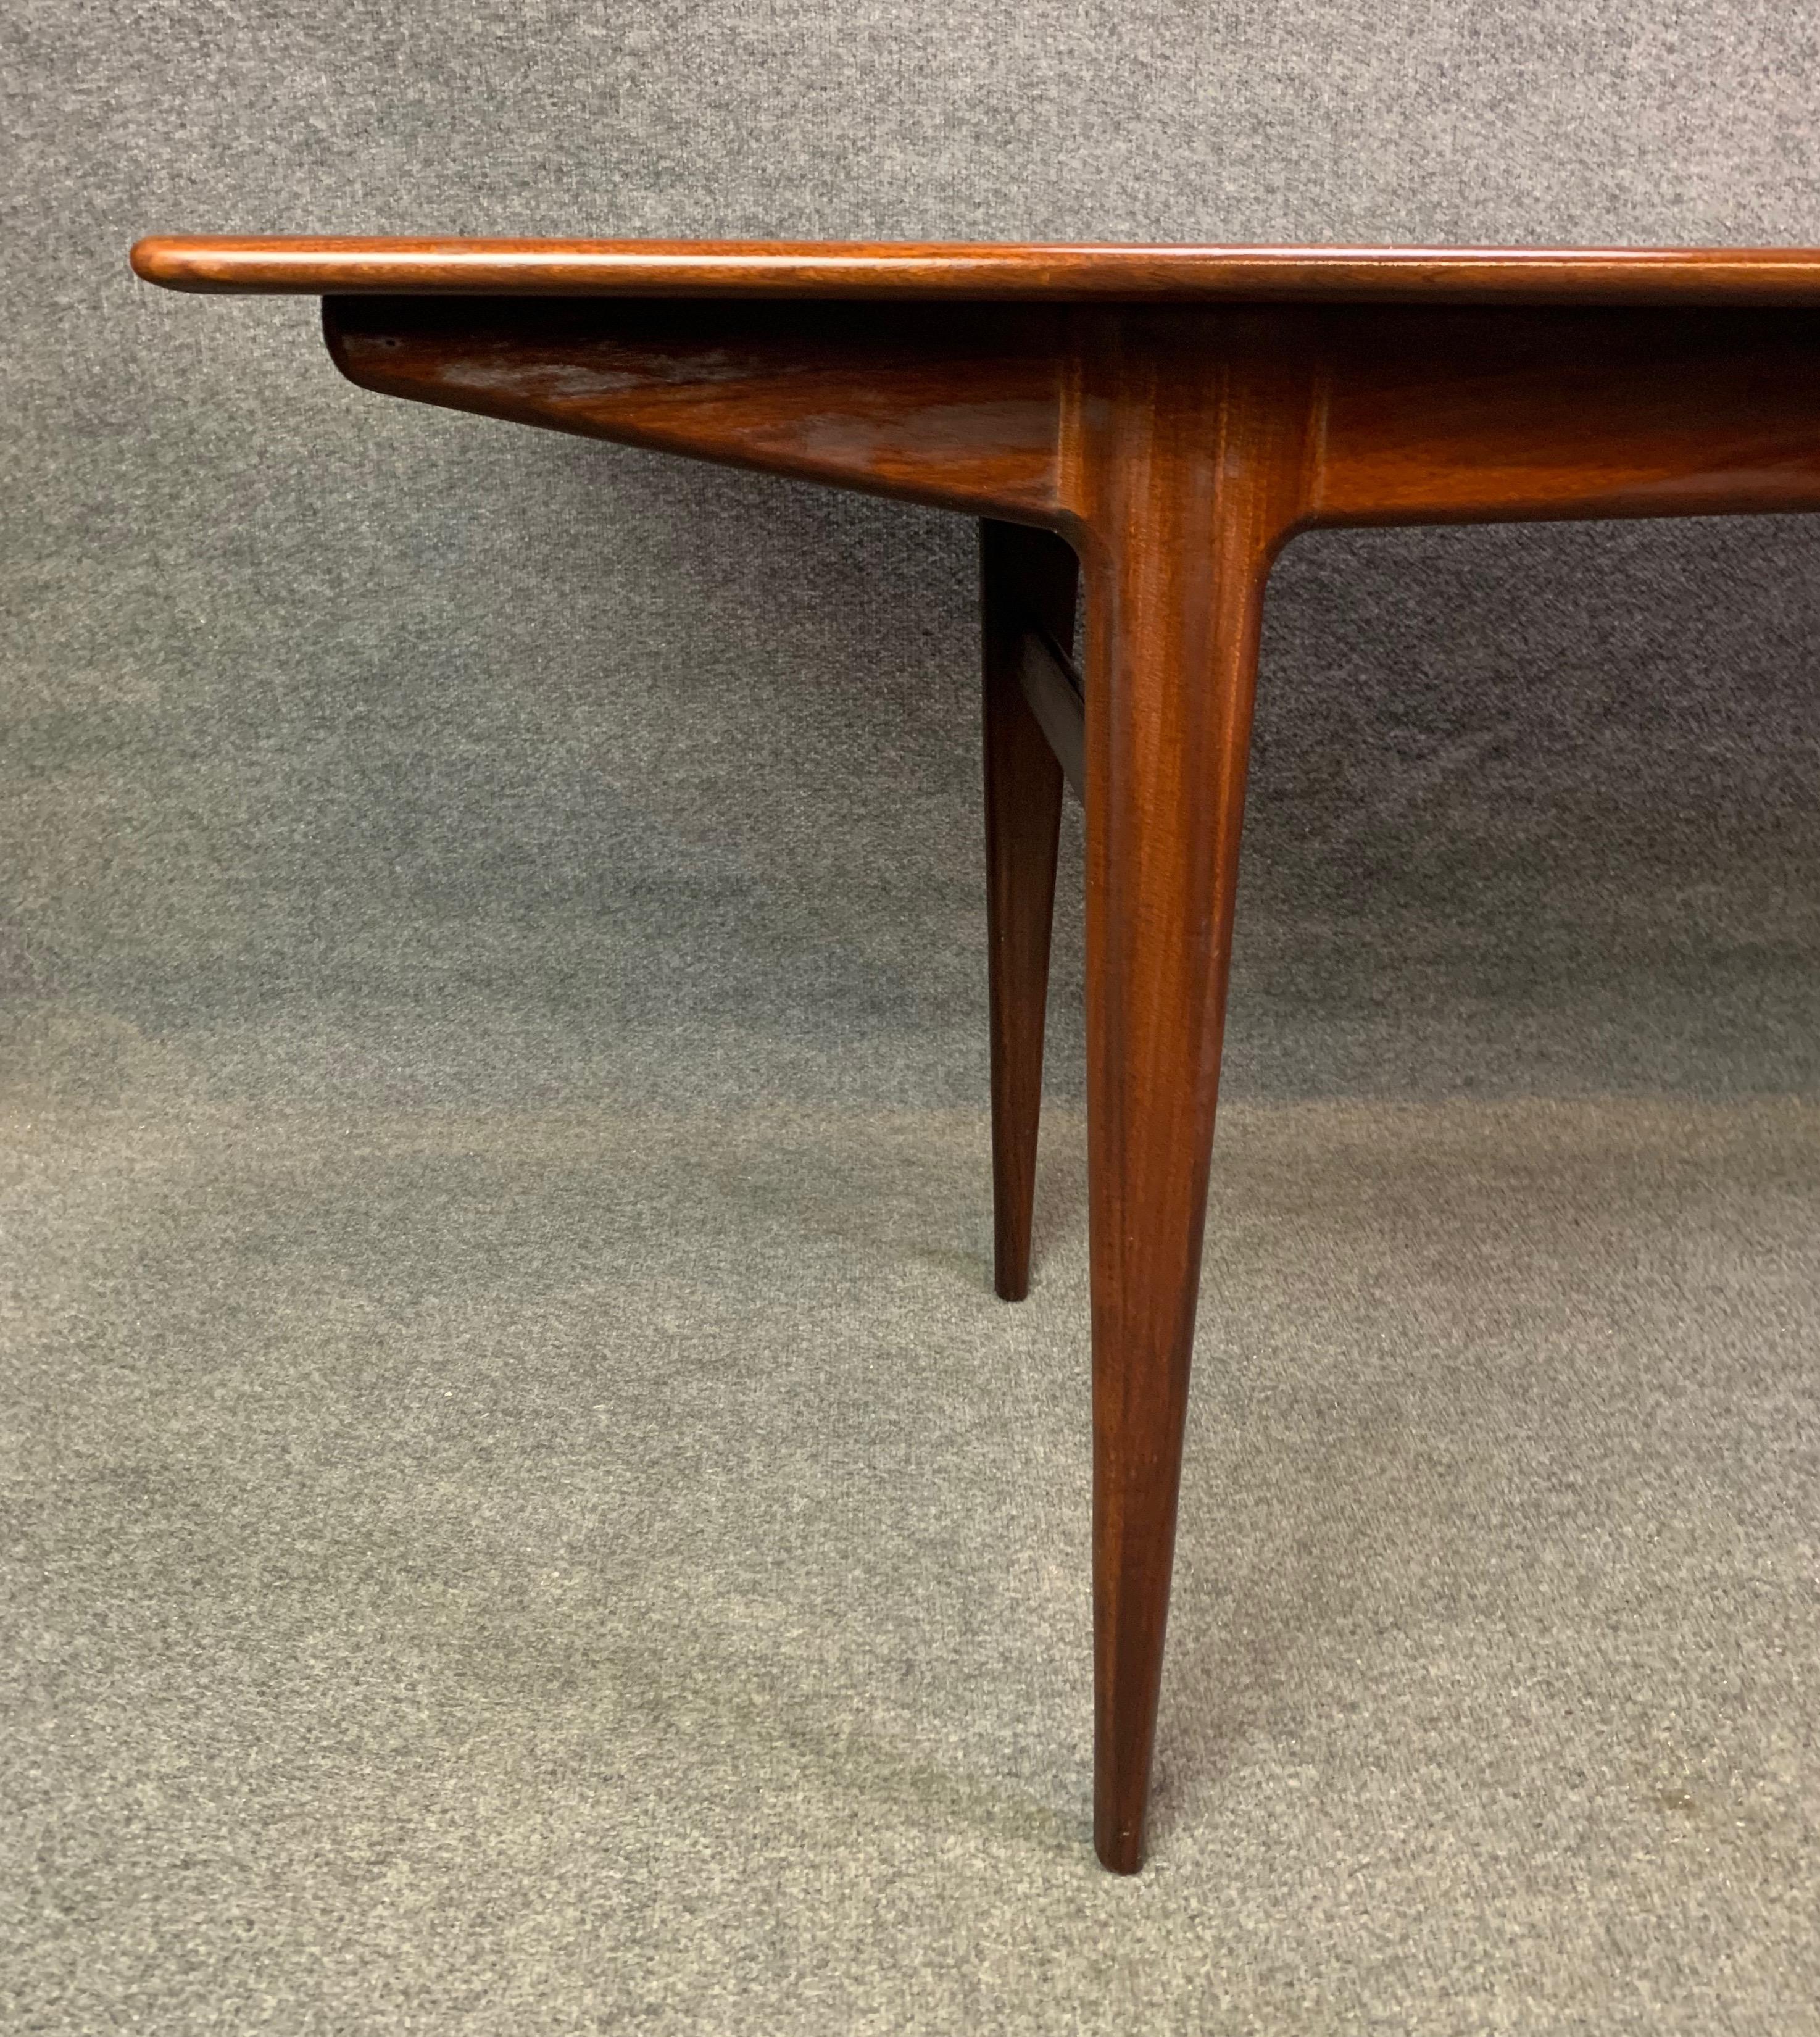 Here is a beautiful british Mid-Century Modern solid African teak dining table attributed to designer Richard Hornby and manufacturer Fyne Ladye, UK, 1960s.
This long table, recently imported from England to California before its refinishing,